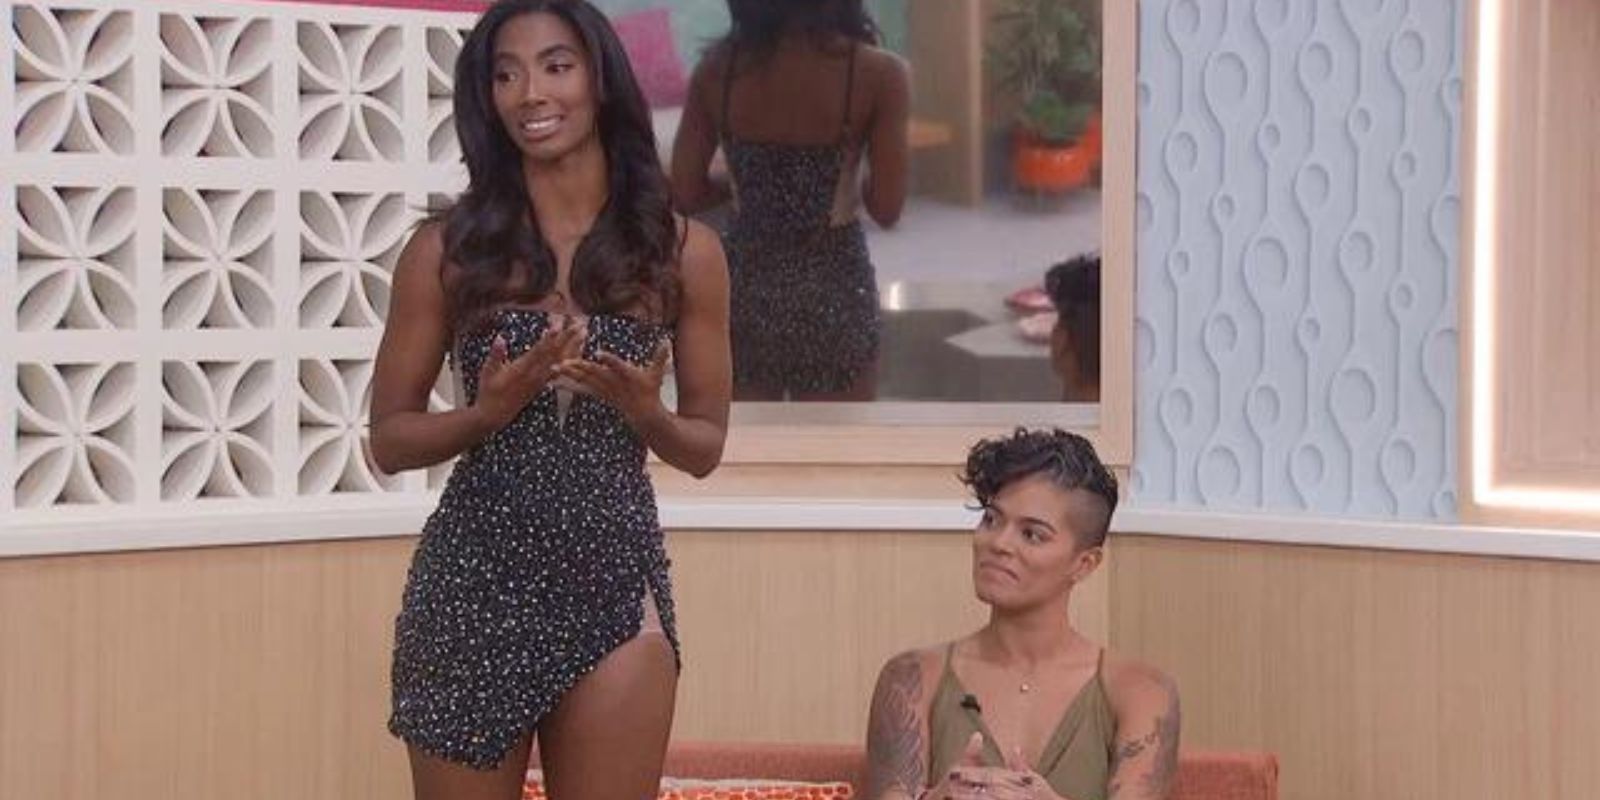 Taylor Hale stands to say her speech against Nicole